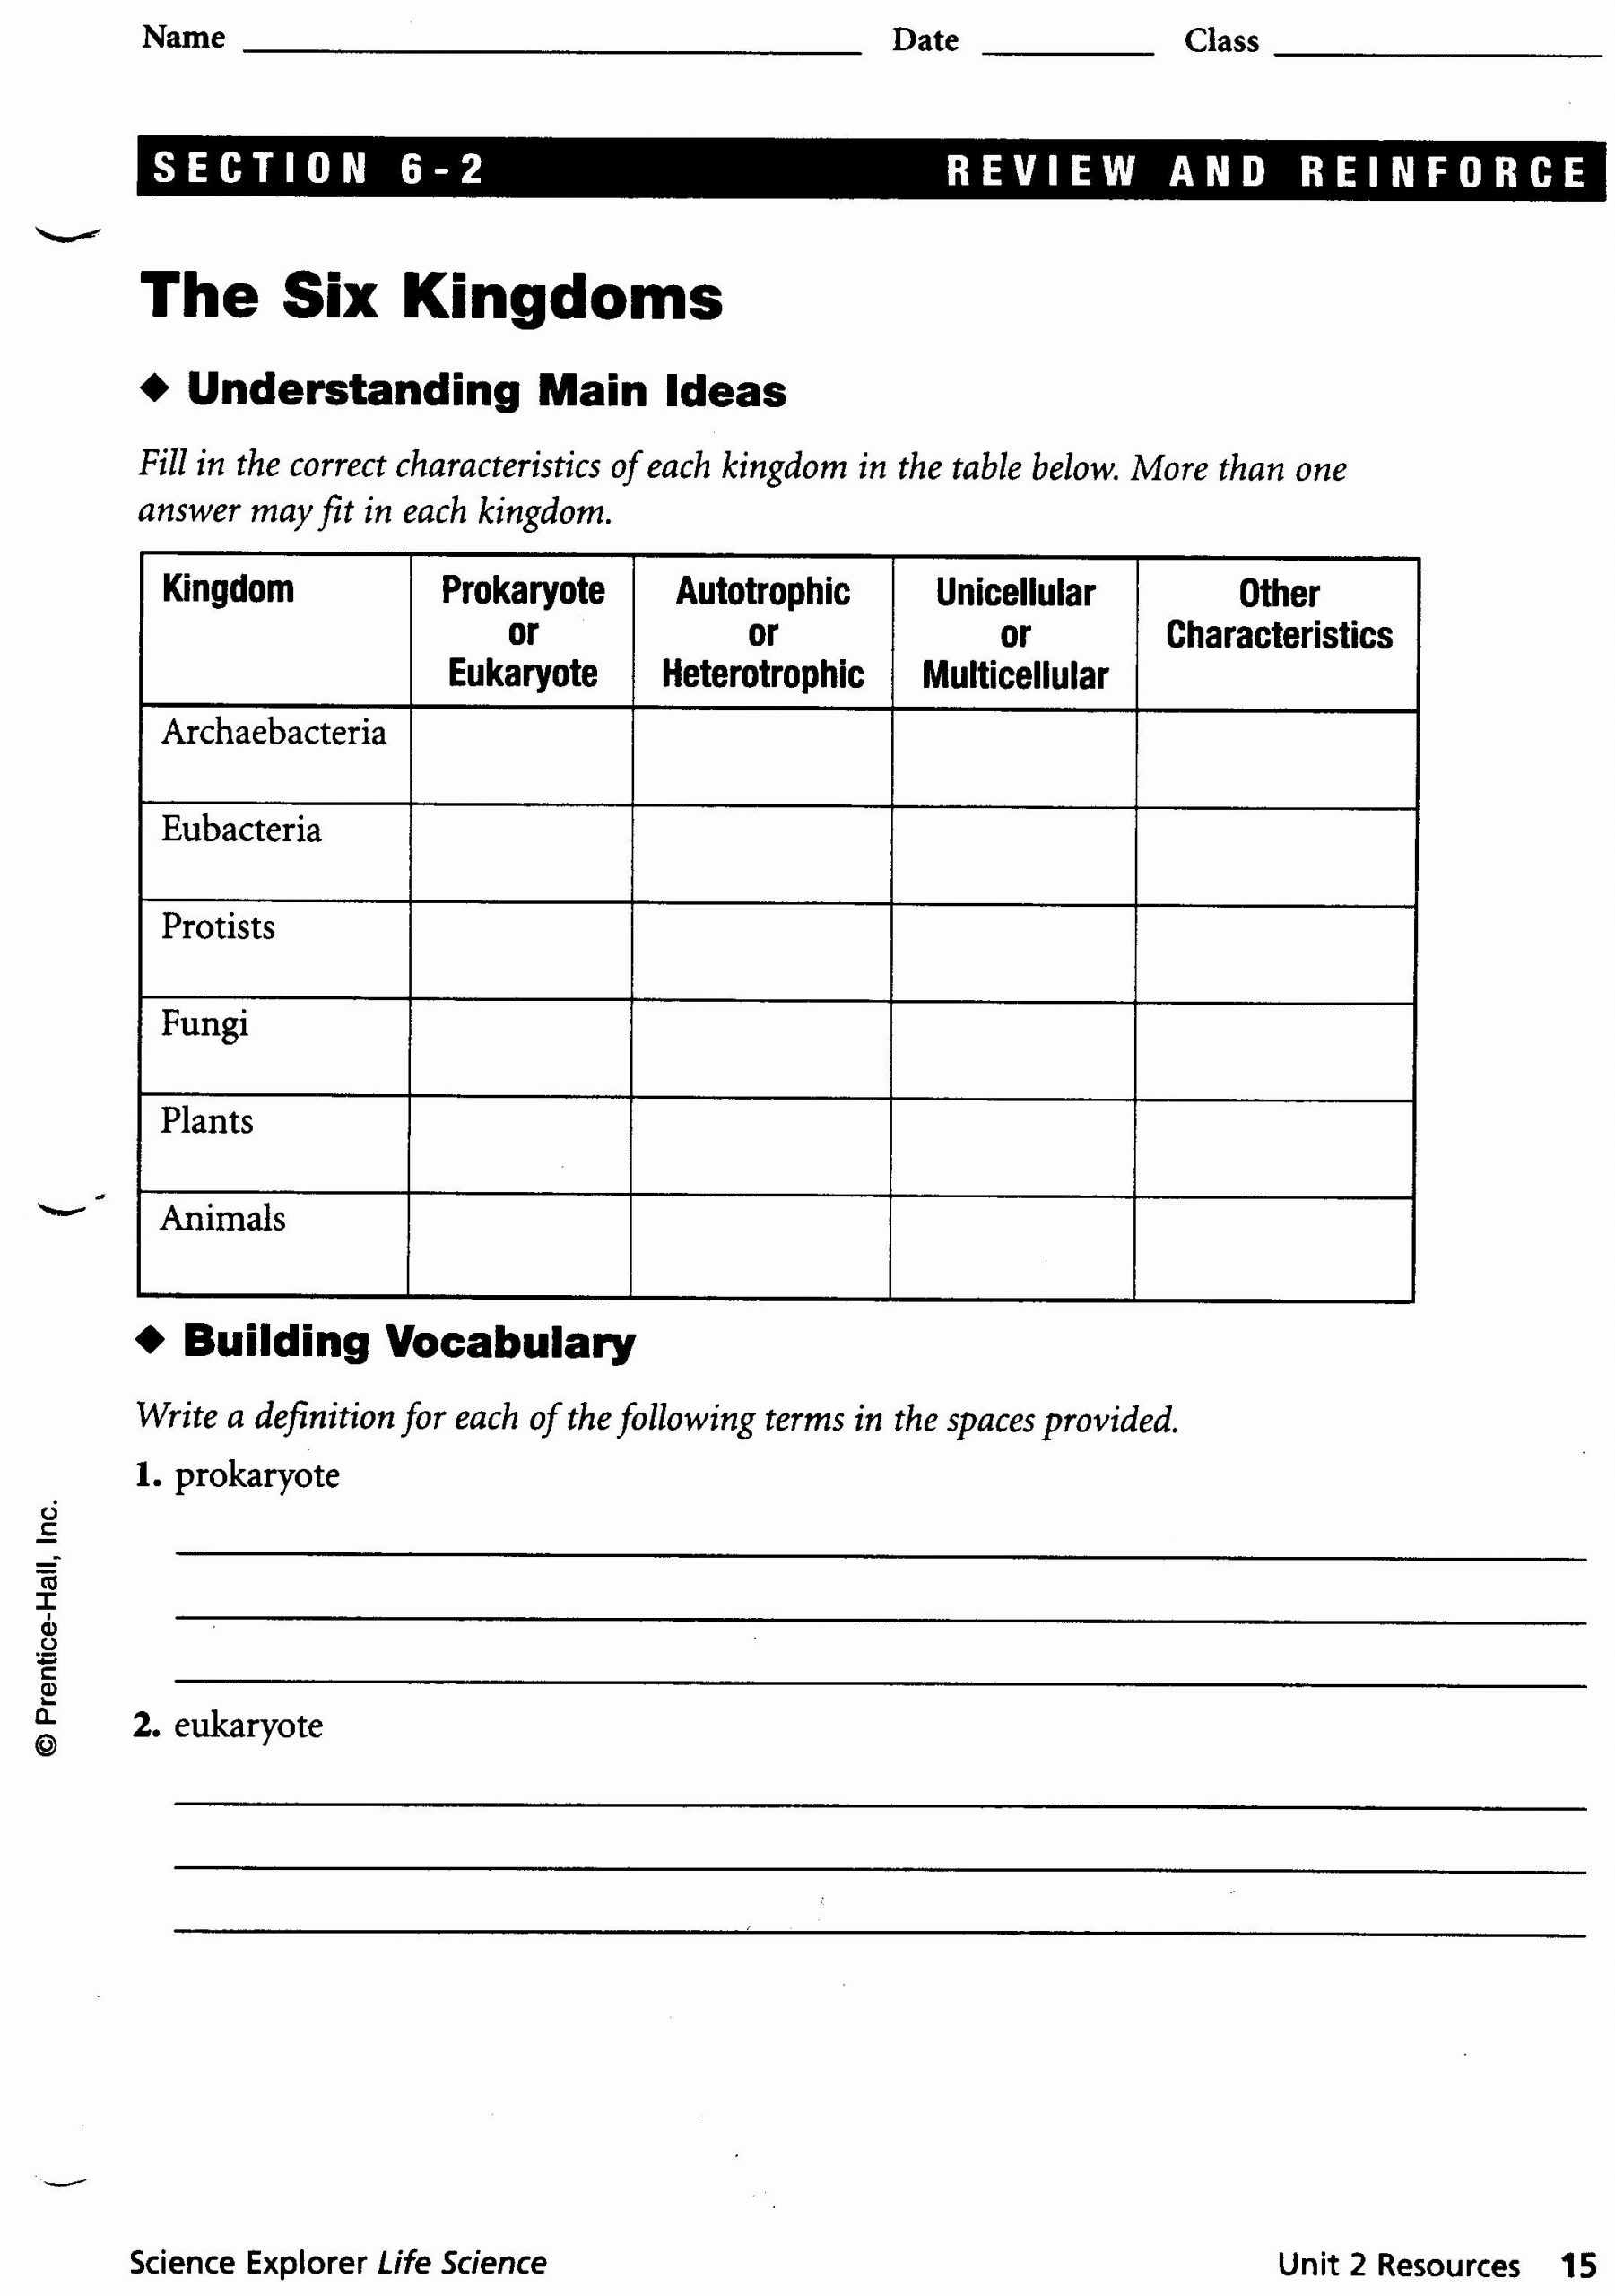 Biological Classification Worksheet Answers 50 Biological Classification Worksheet Answers In 2020